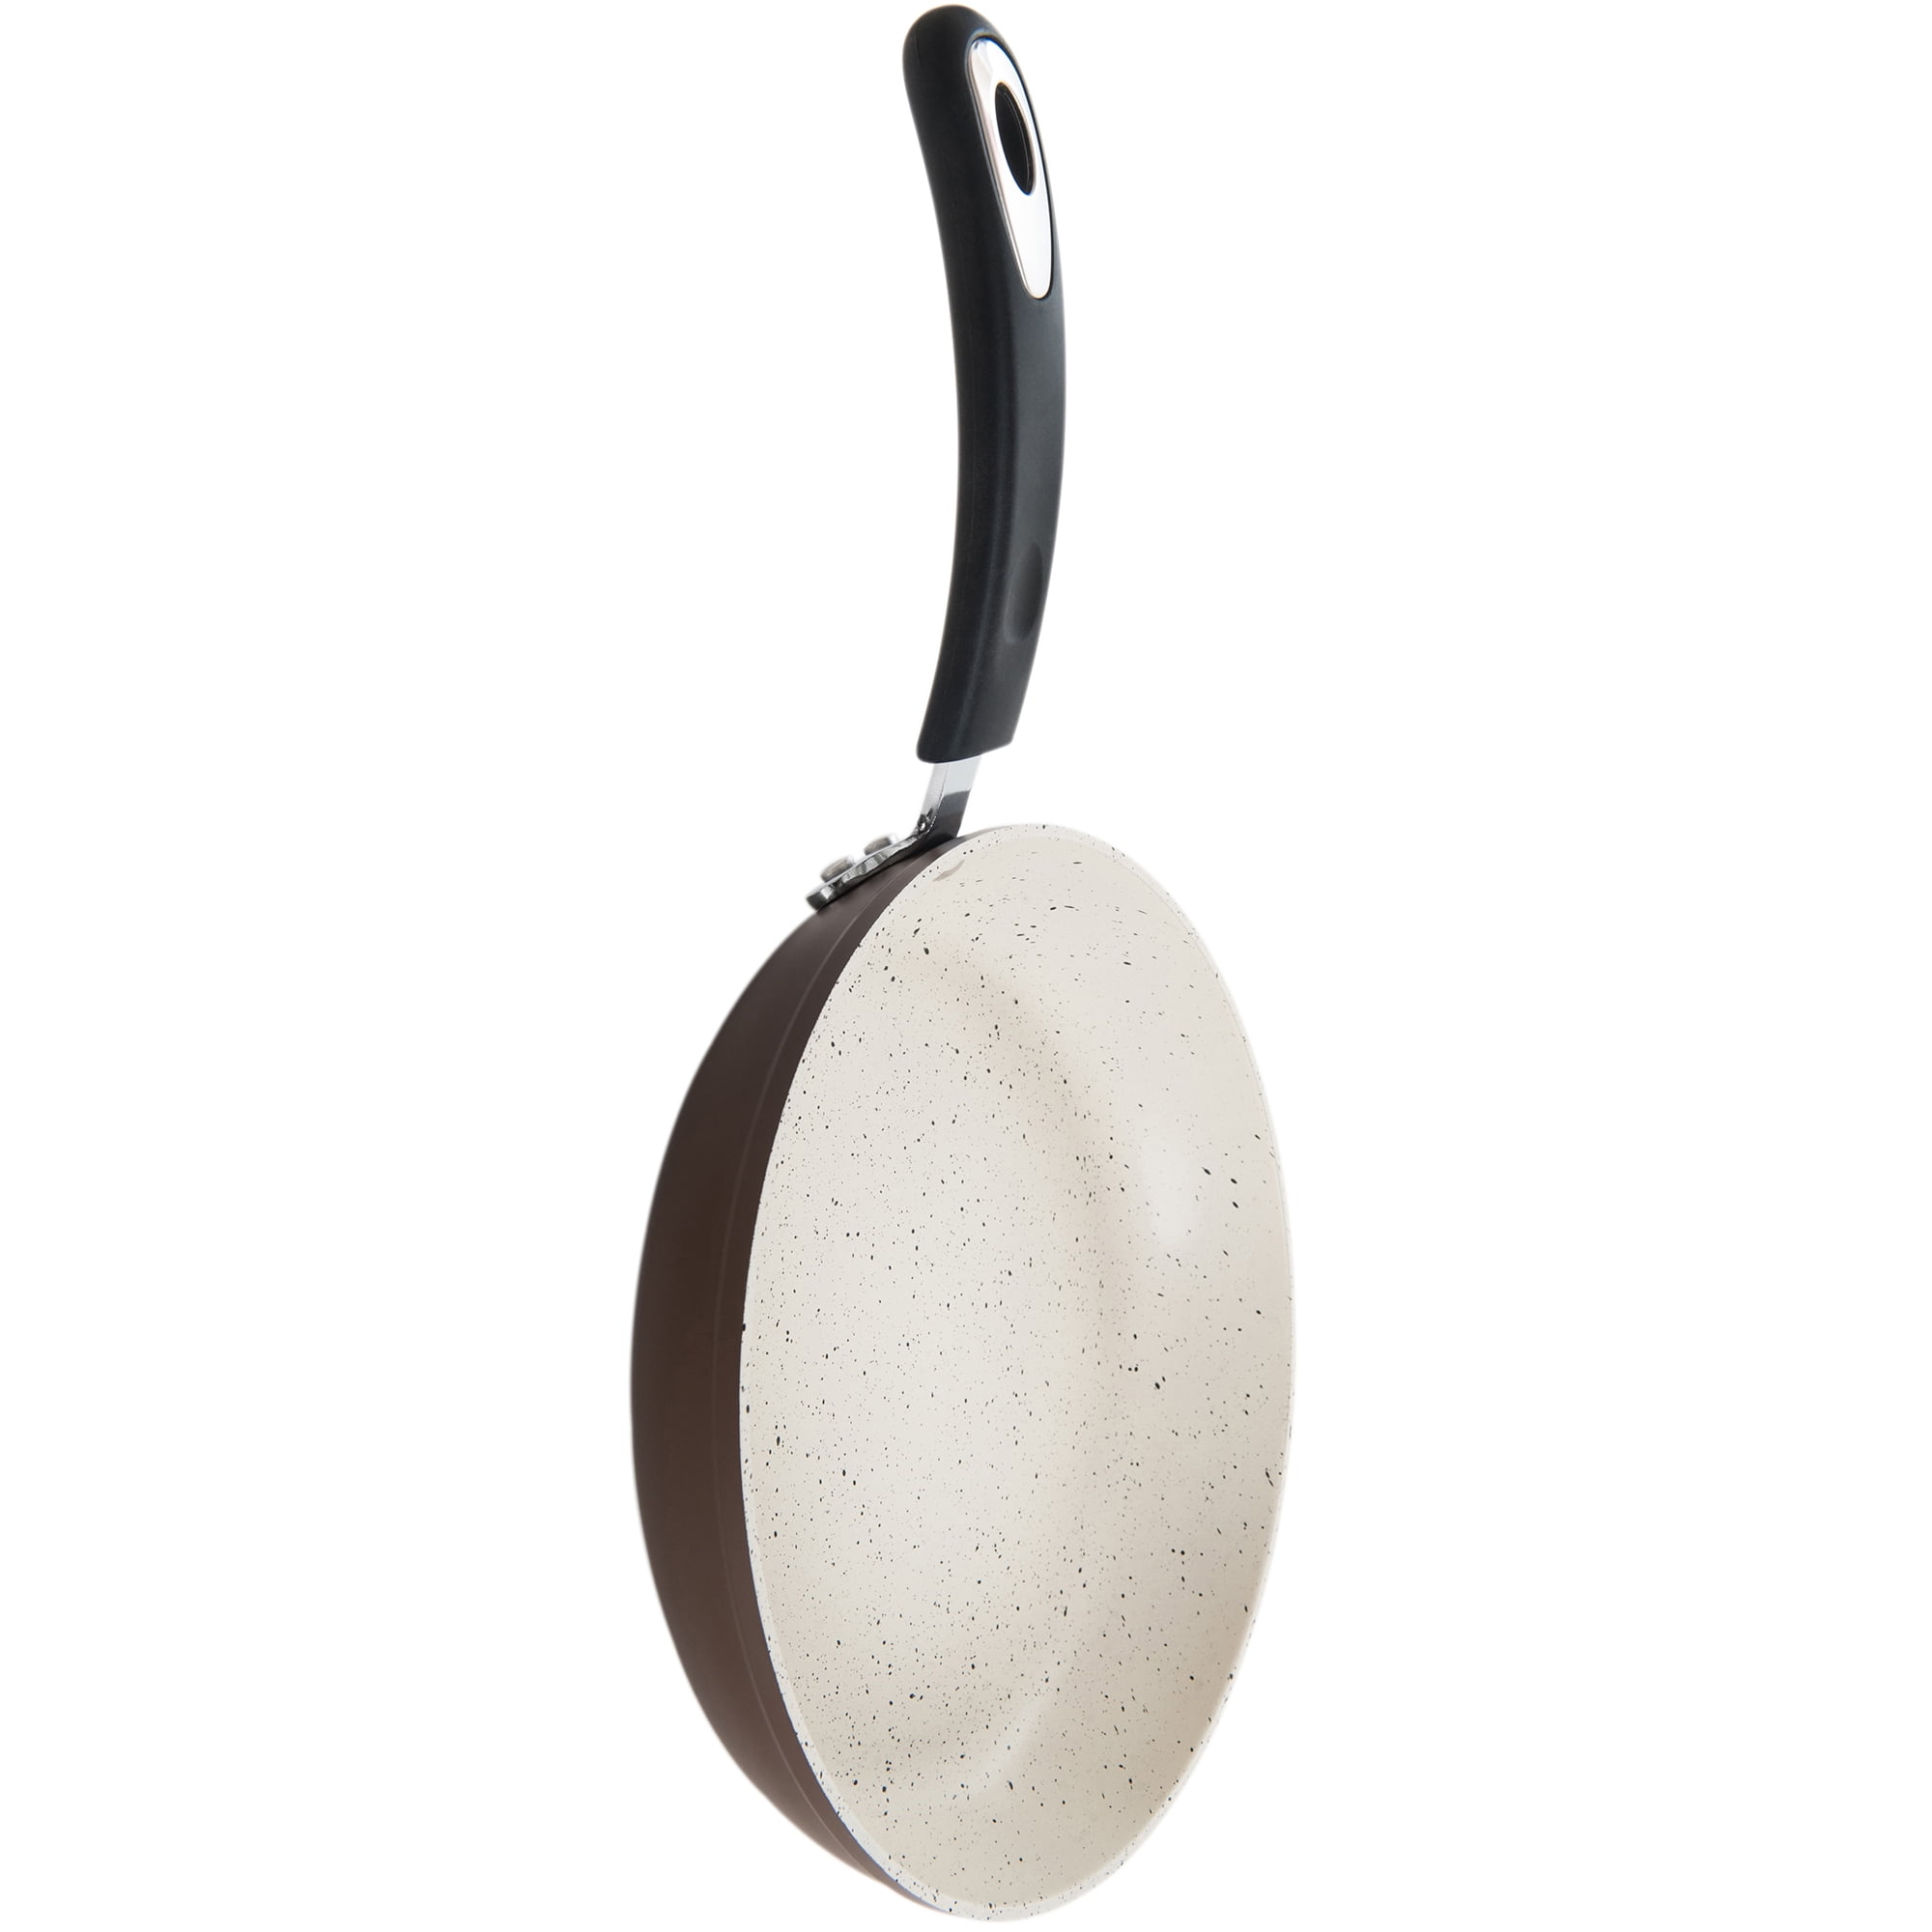 12 Stone Earth Fry Pan by Ozeri, with a 100% APEO & PFOA-Free Nonstick  Coating from Germany, 1 - Fry's Food Stores